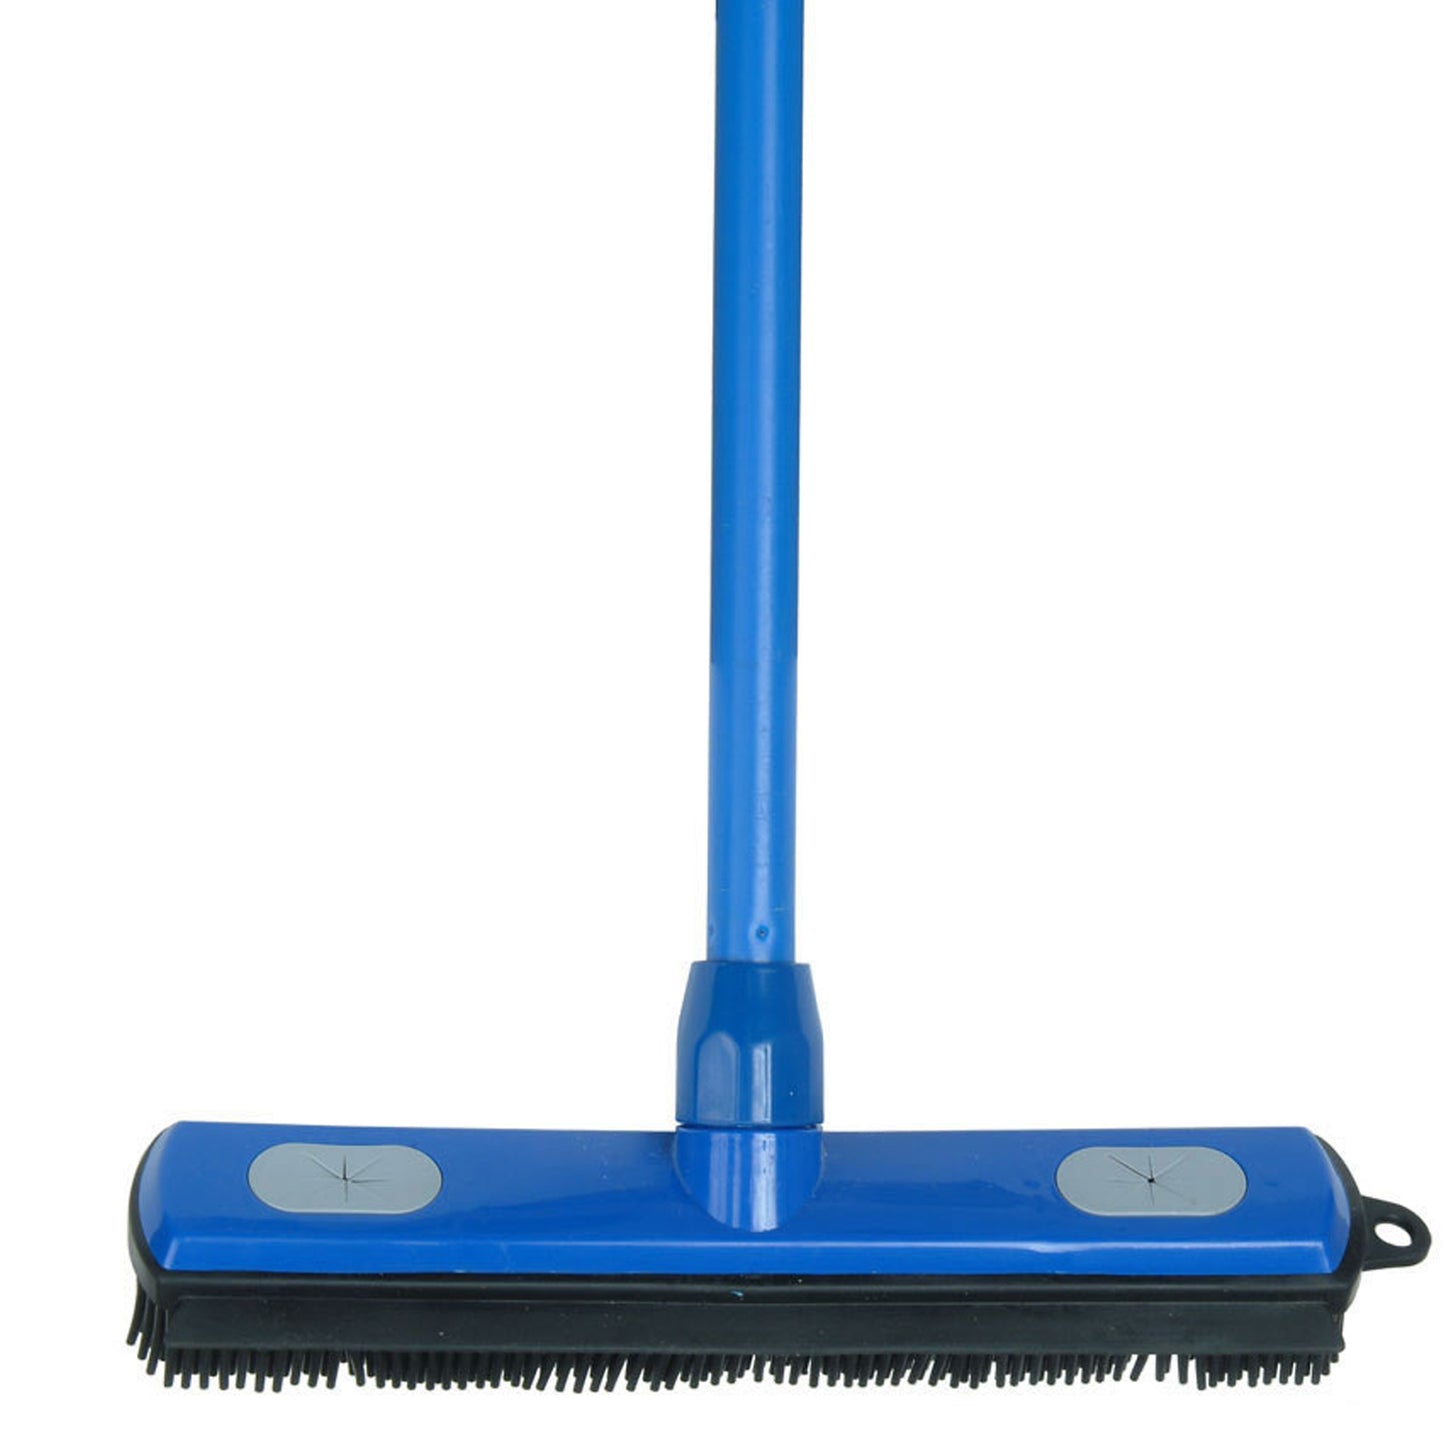 All-Purpose Rubber Broom and Squeegee, Grey